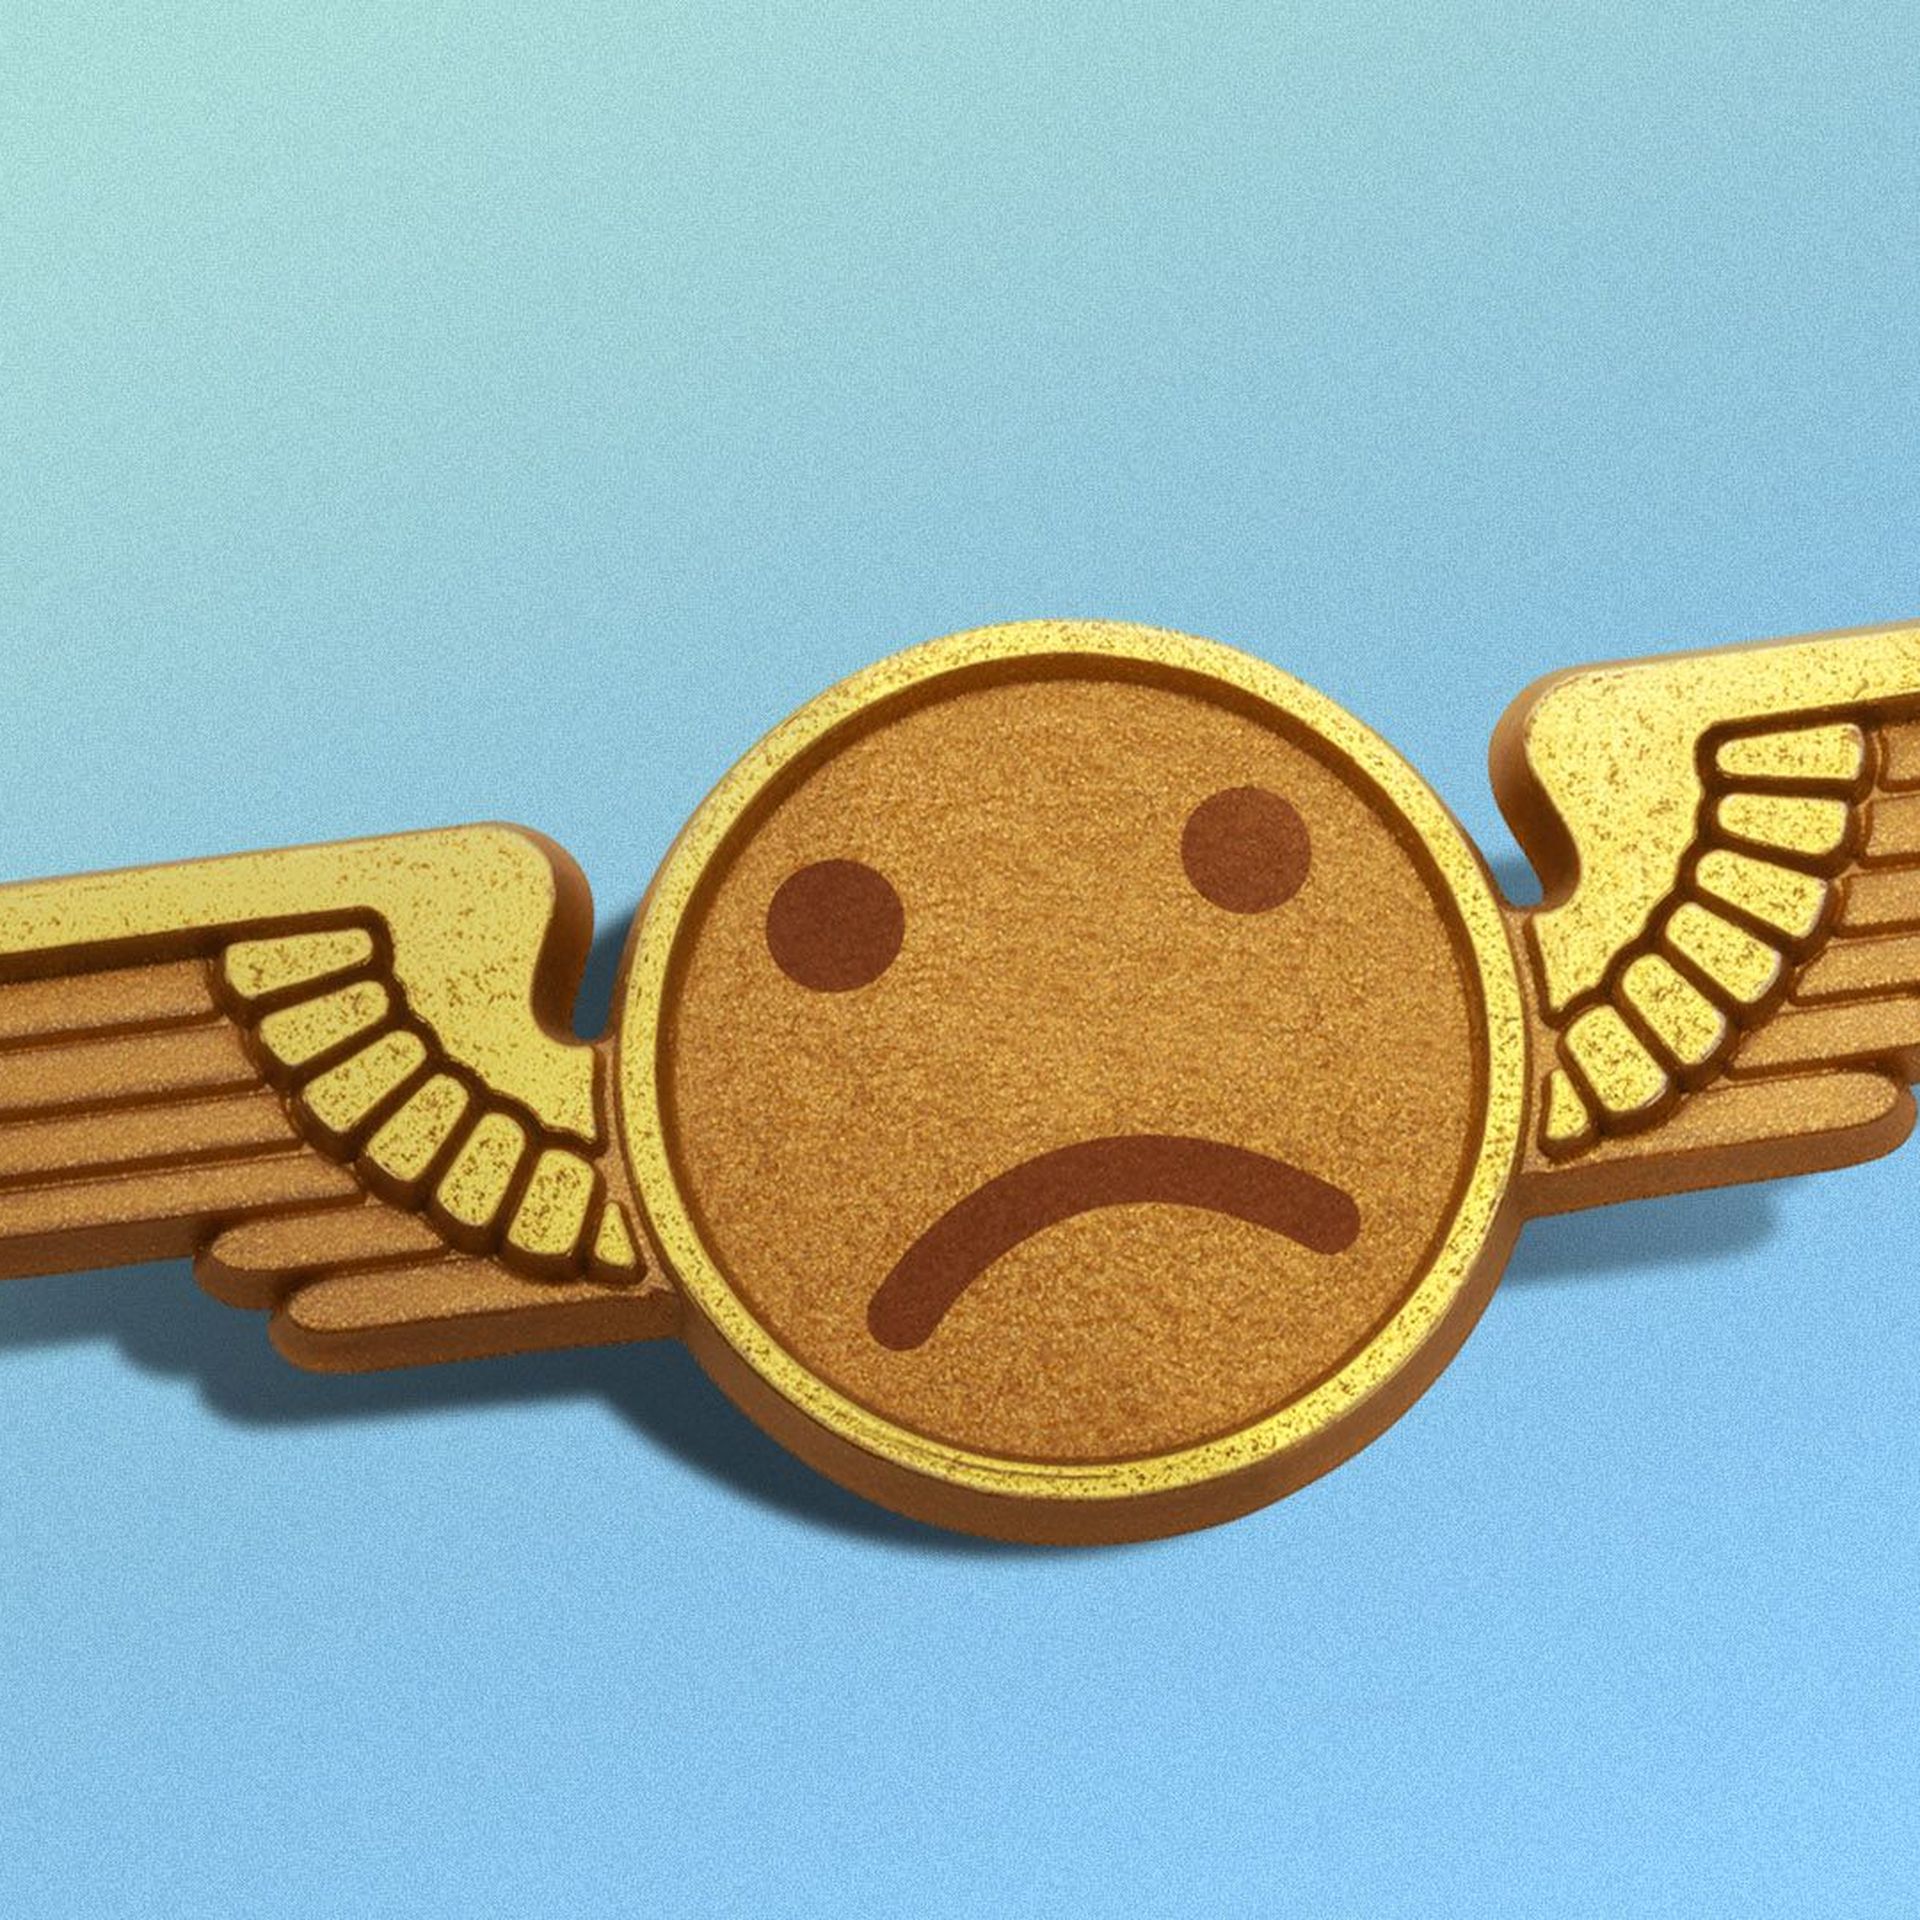 Illustration of a pilot wings pin with a sad face in the middle